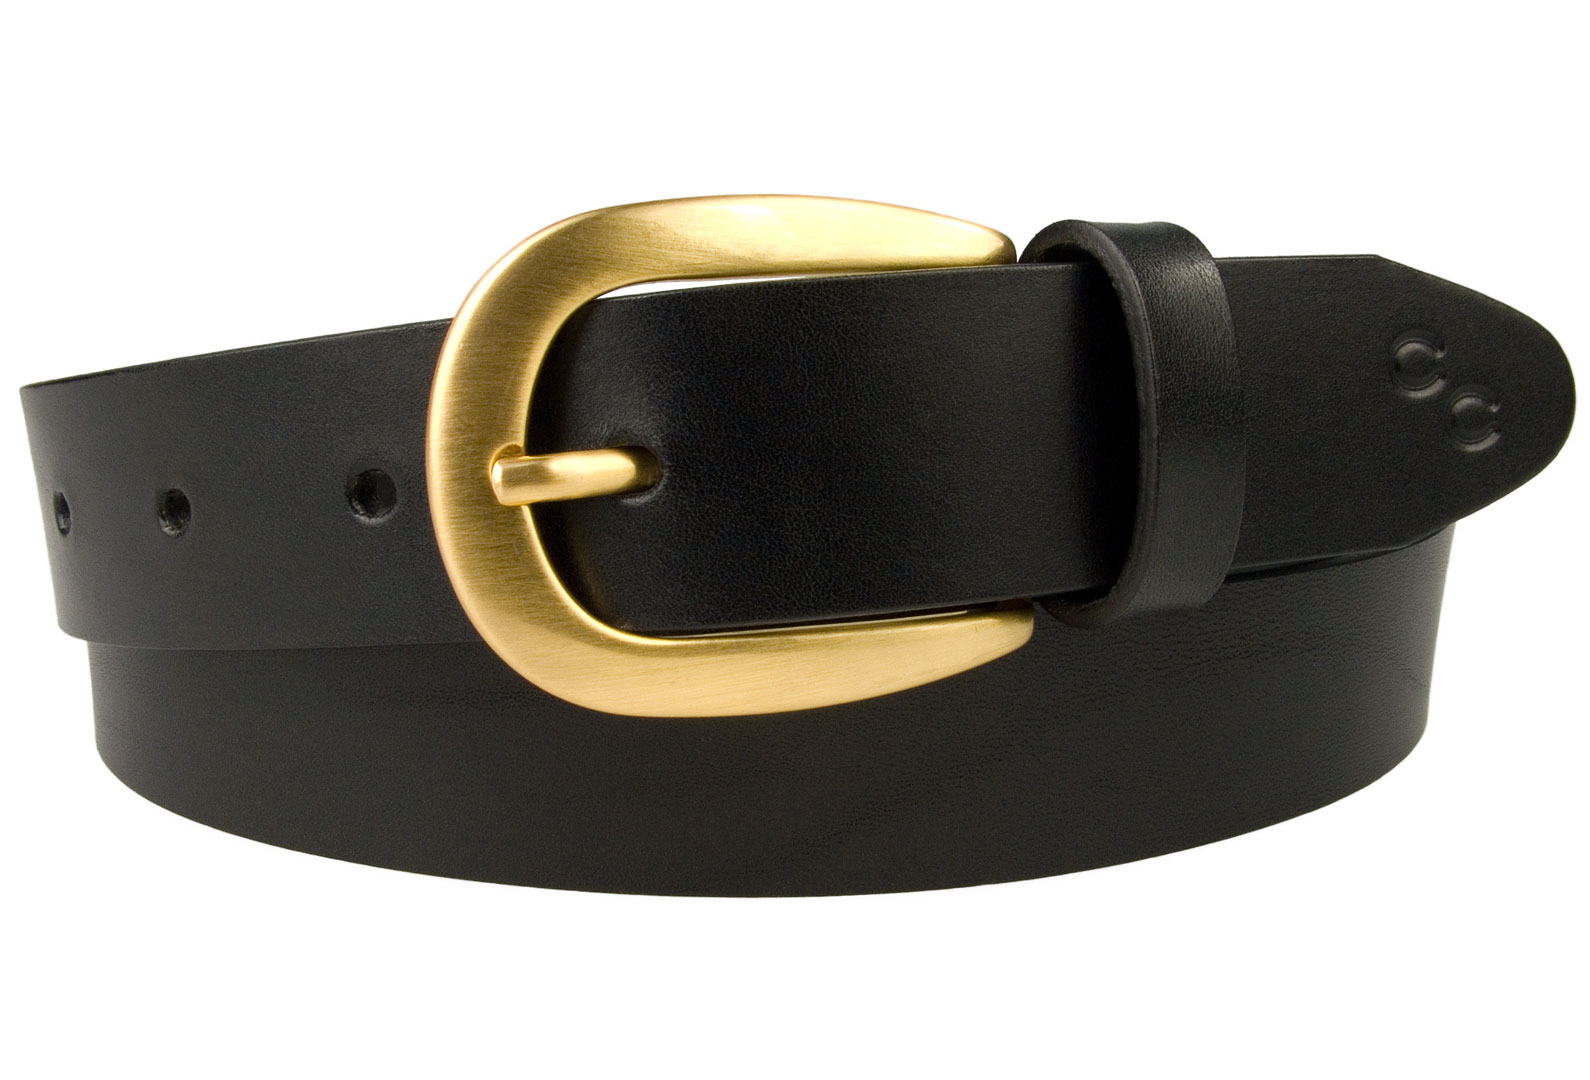 Womens Black Leather Belt With Hand Brushed Gold Buckle. British Made High Quality Leather Belt. Italian Full Grain Vegetable Tanned Leather. Italian Hand Brushed Gold Plated Buckle. Champion Chase Double Horse Shoe Motif to tip of belt. 3cm Wide (1.2 inch approx).